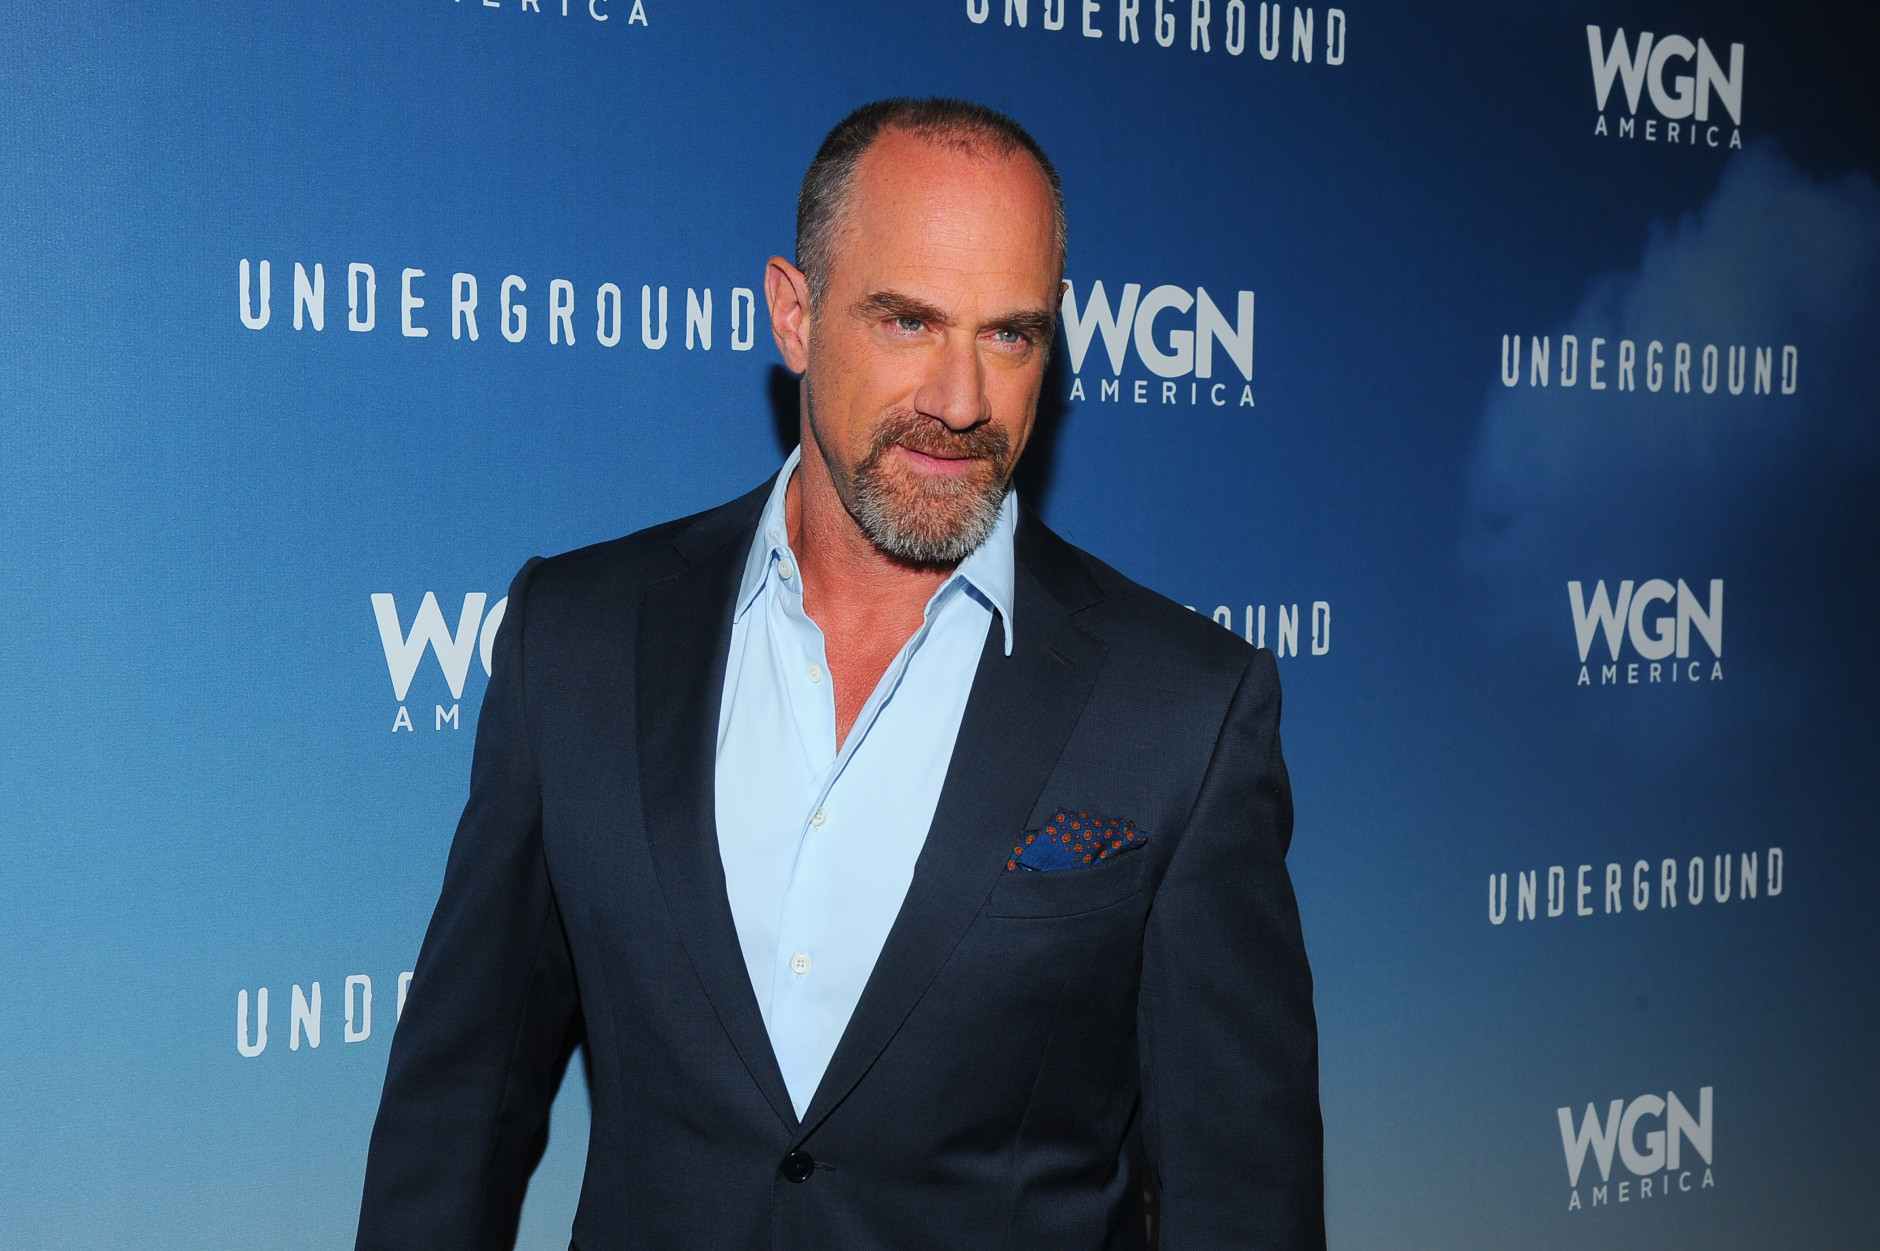 Actor Christopher Meloni seen at WGN America Winter TCA 2016 at The Langham Huntington Hotel on Friday, January 8, 2016 in Pasadena, CA.. (Photo by Vince Bucci/Invision for WGN America/AP Images)